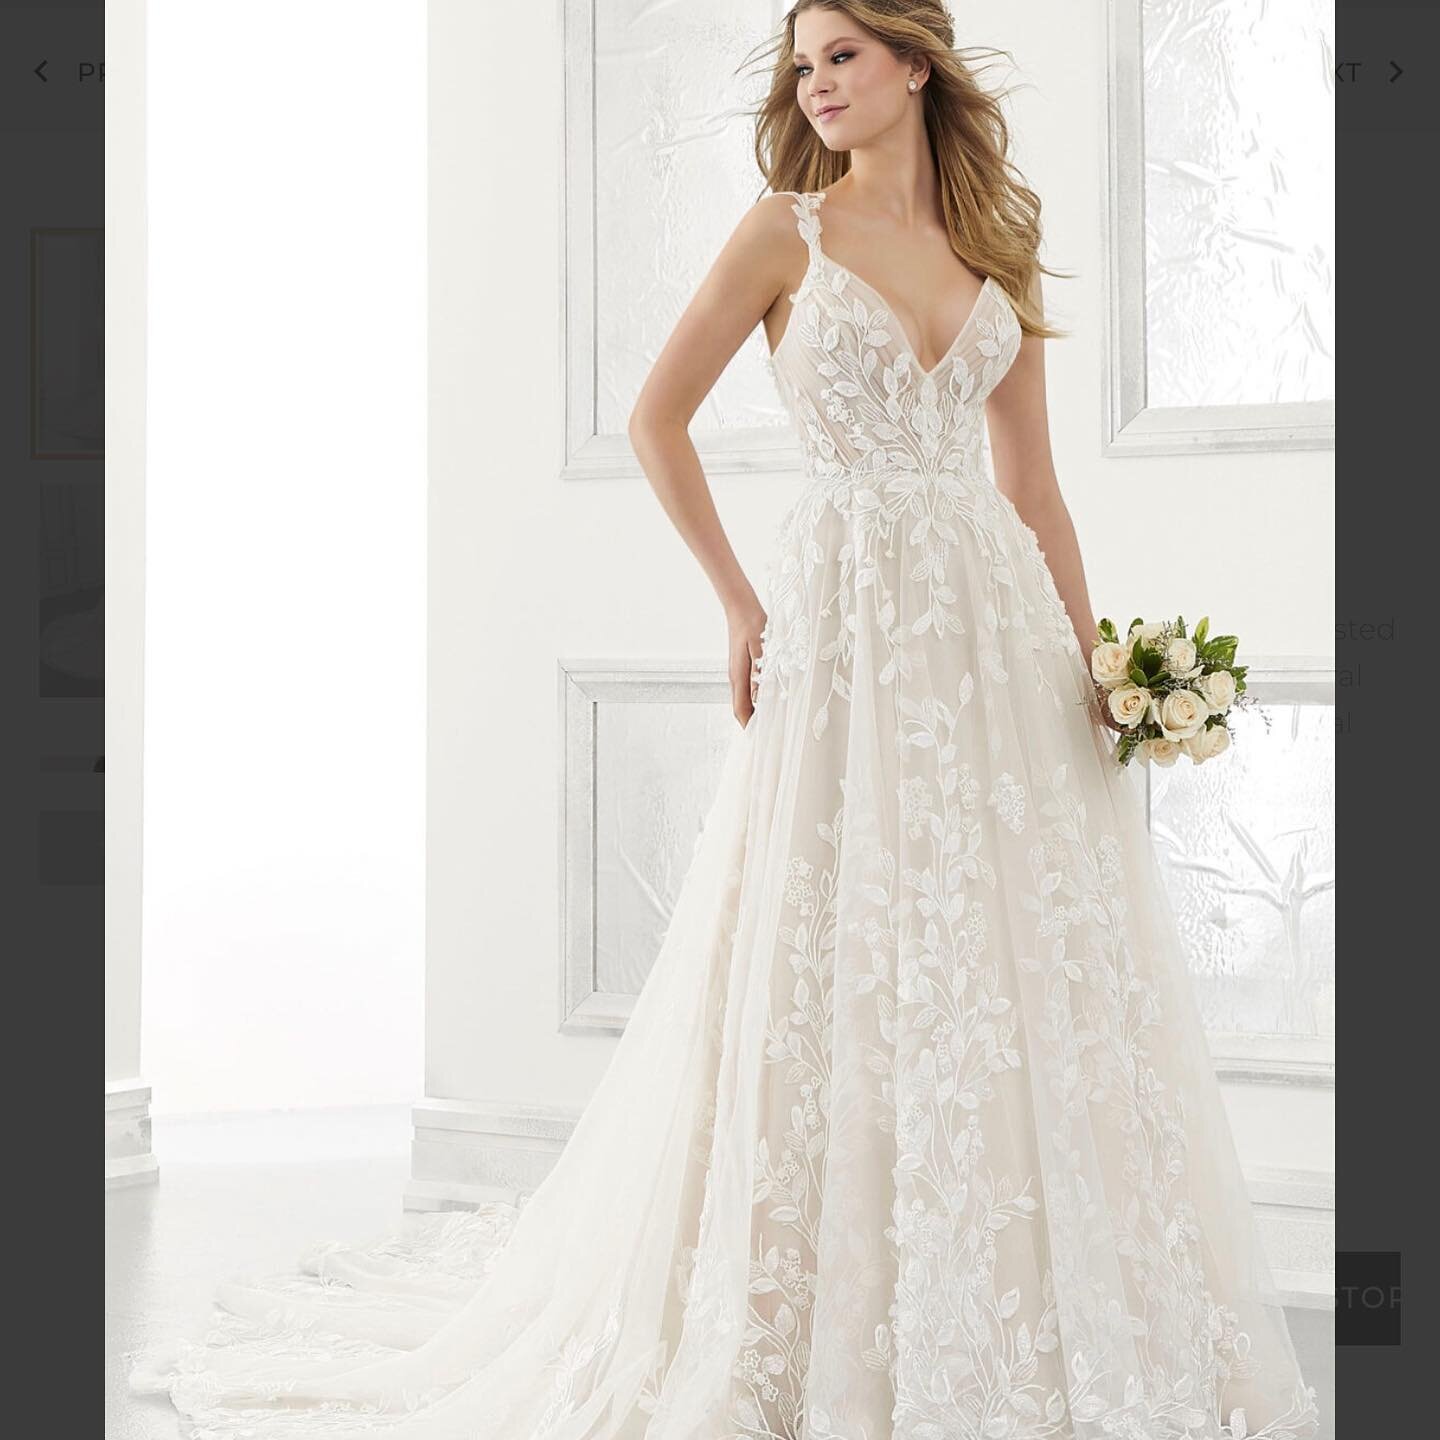 Book your appointment today to find your perfect gown